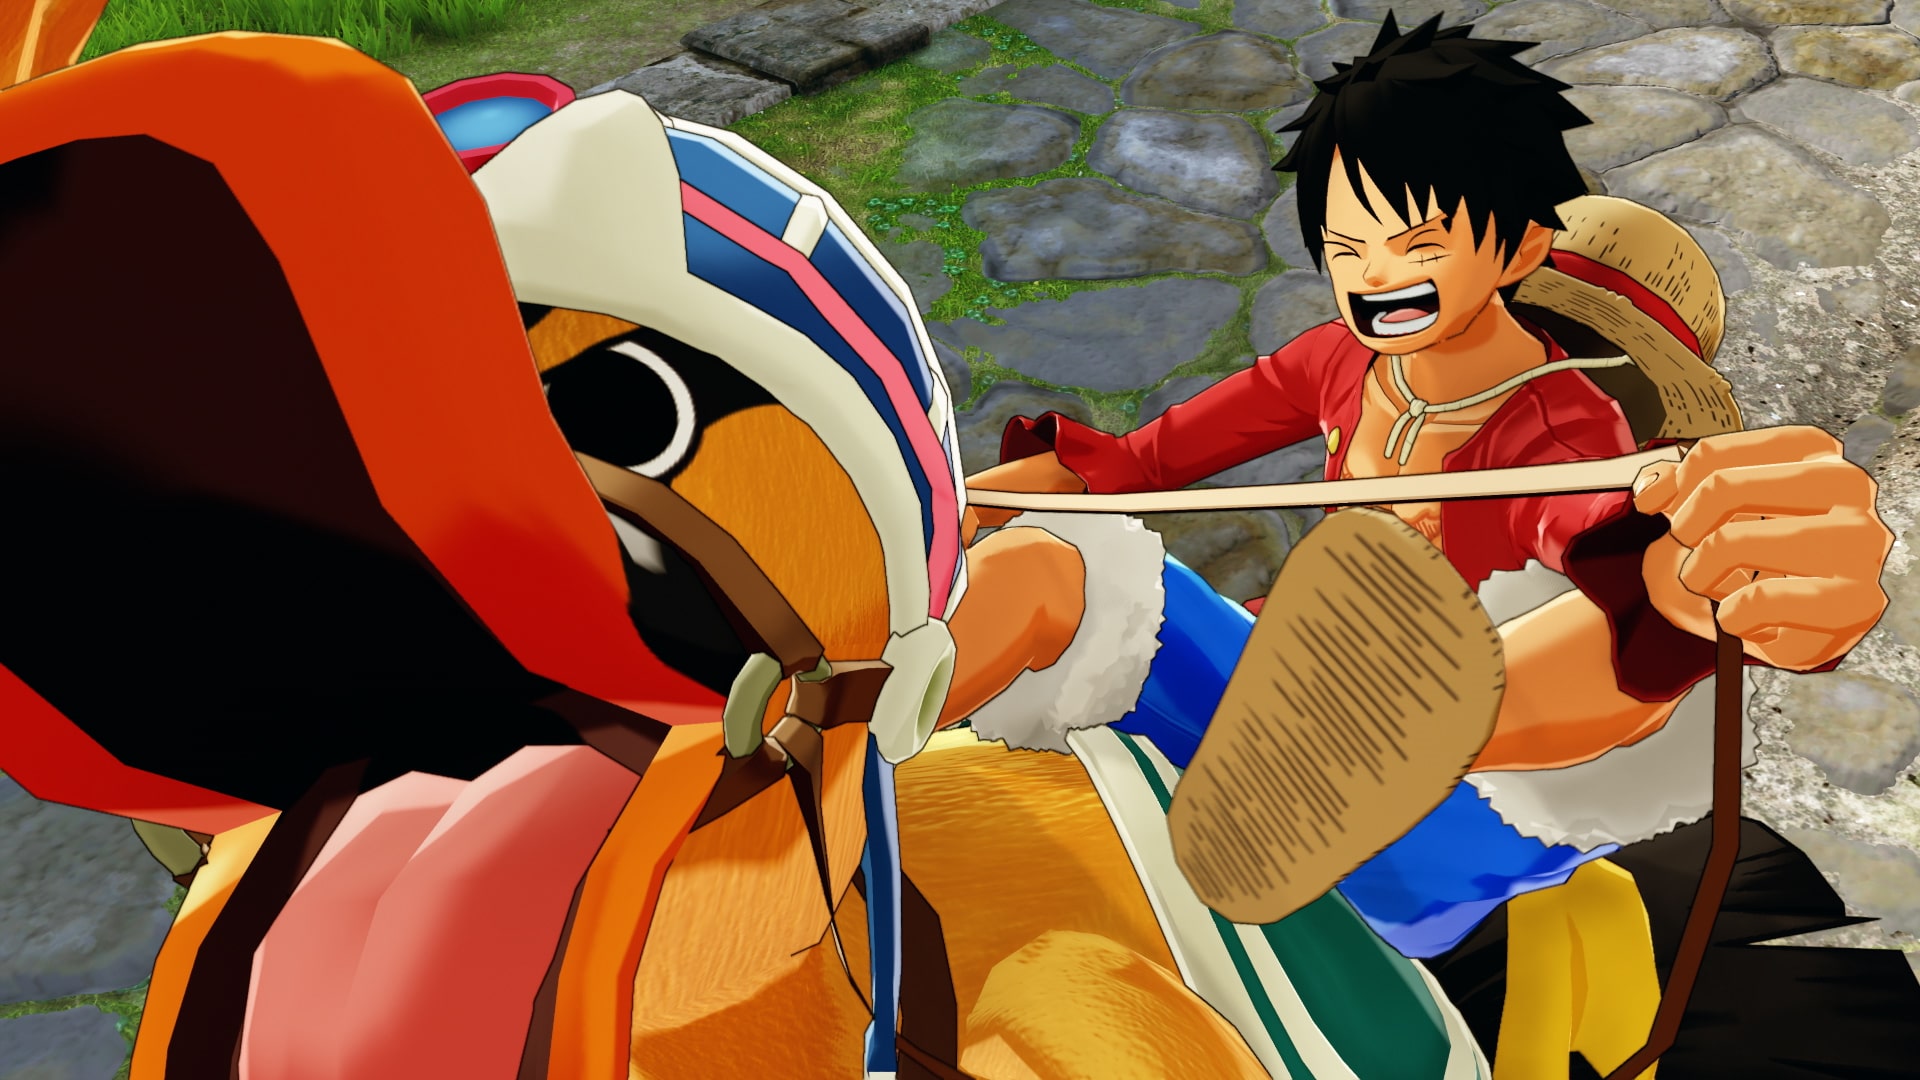 One Piece World Seeker Extra Episode 3: The Unfinished Map Trophy Guides  and PSN Price History